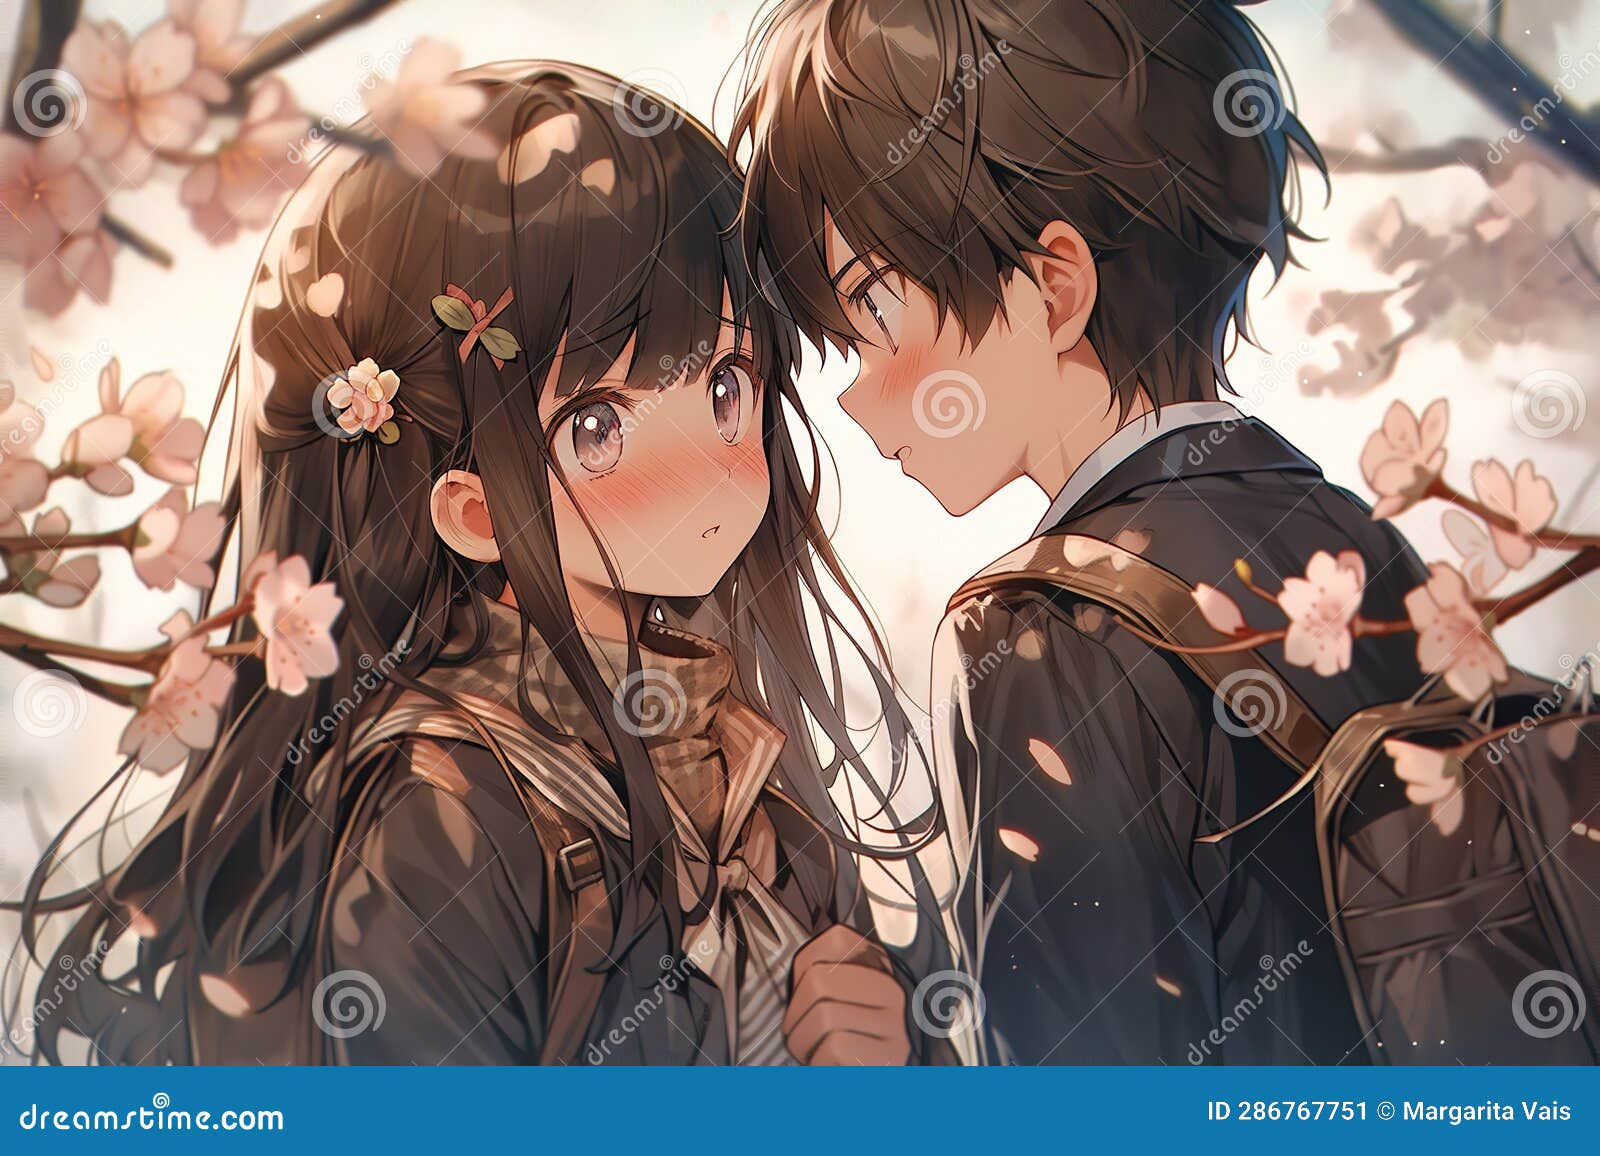 Cute Boy Girl Anime Style Stock Illustrations  560 Cute Boy Girl Anime  Style Stock Illustrations Vectors  Clipart  Dreamstime